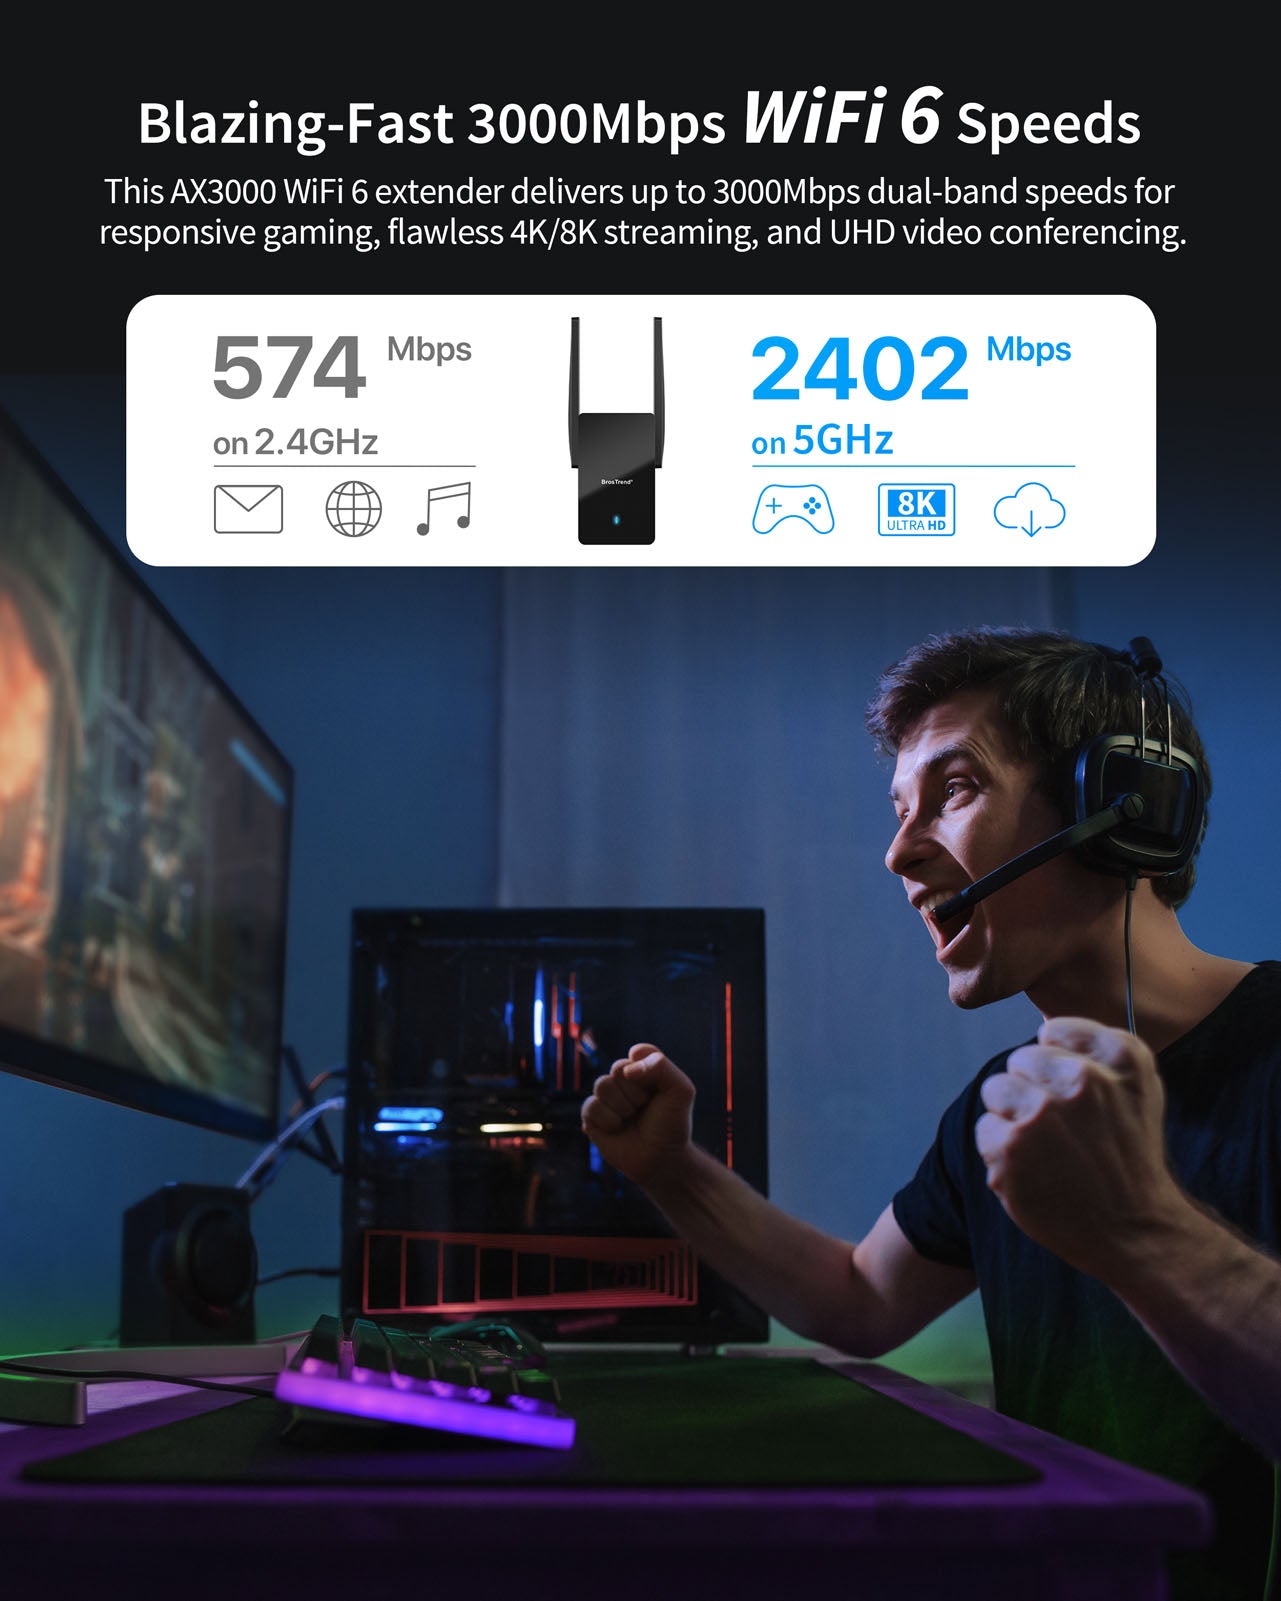 A Man Is Involved in Gameplay with Fast WiFi Delivered by AX3000 Dual Band WiFi 6 Extender Enjoy Faster Speeds of 2402 Mbps on 5GHz and 574Mbps over 2.4GHz Wireless Band for Gaming 4K 8K Streaming and Video Conferencing